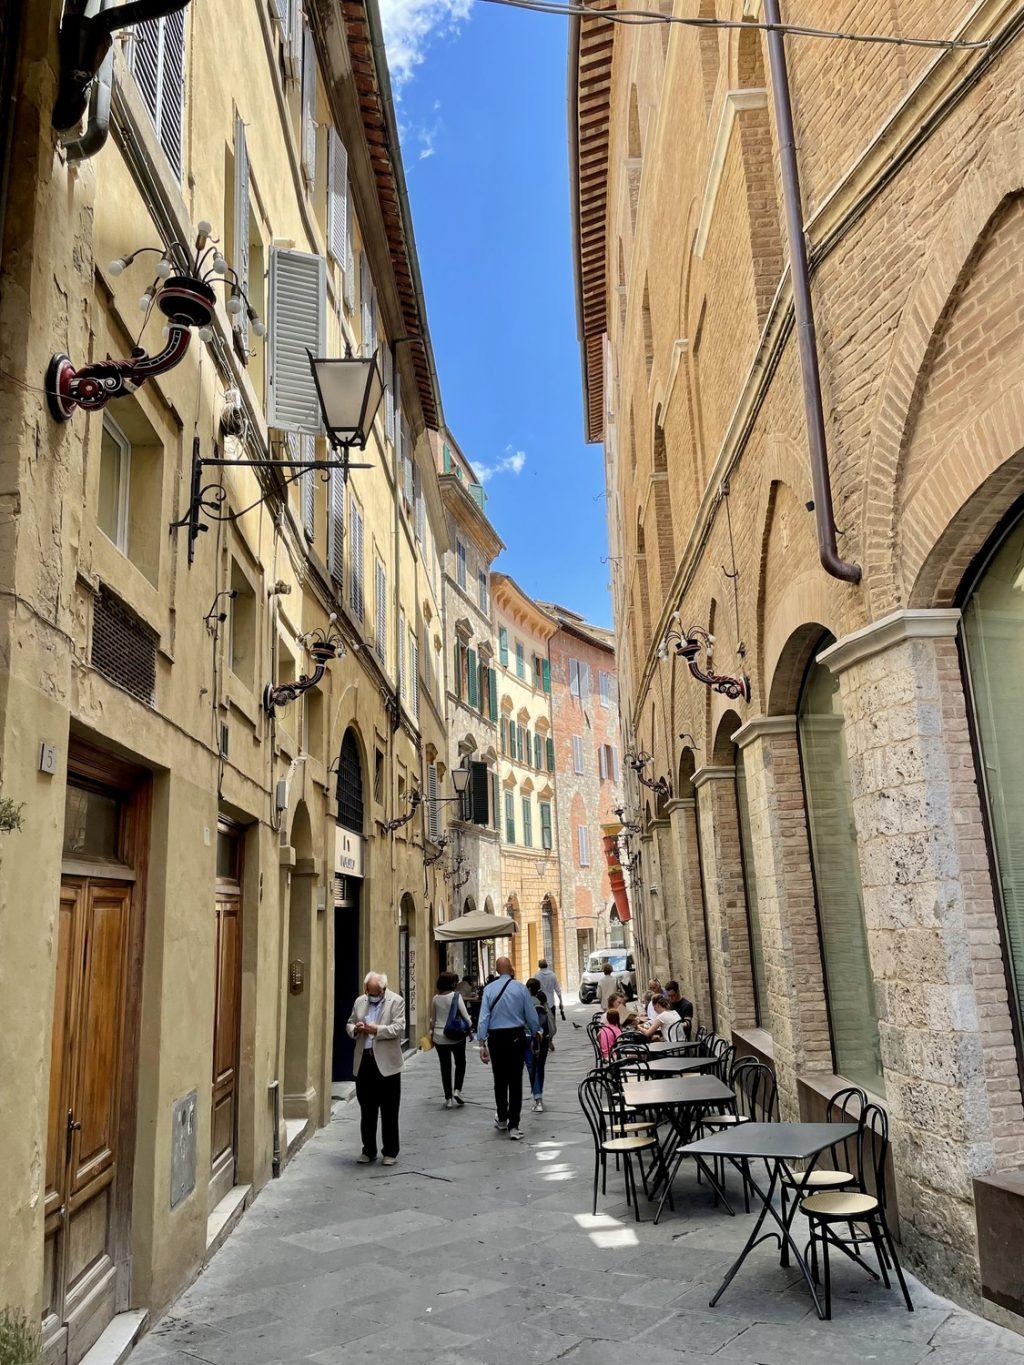 A view of one of the many side streets in Siena, Italy on June 9. These small alleyways gave Italy so much of its charm and were home to some of the best restaurants of the trip.